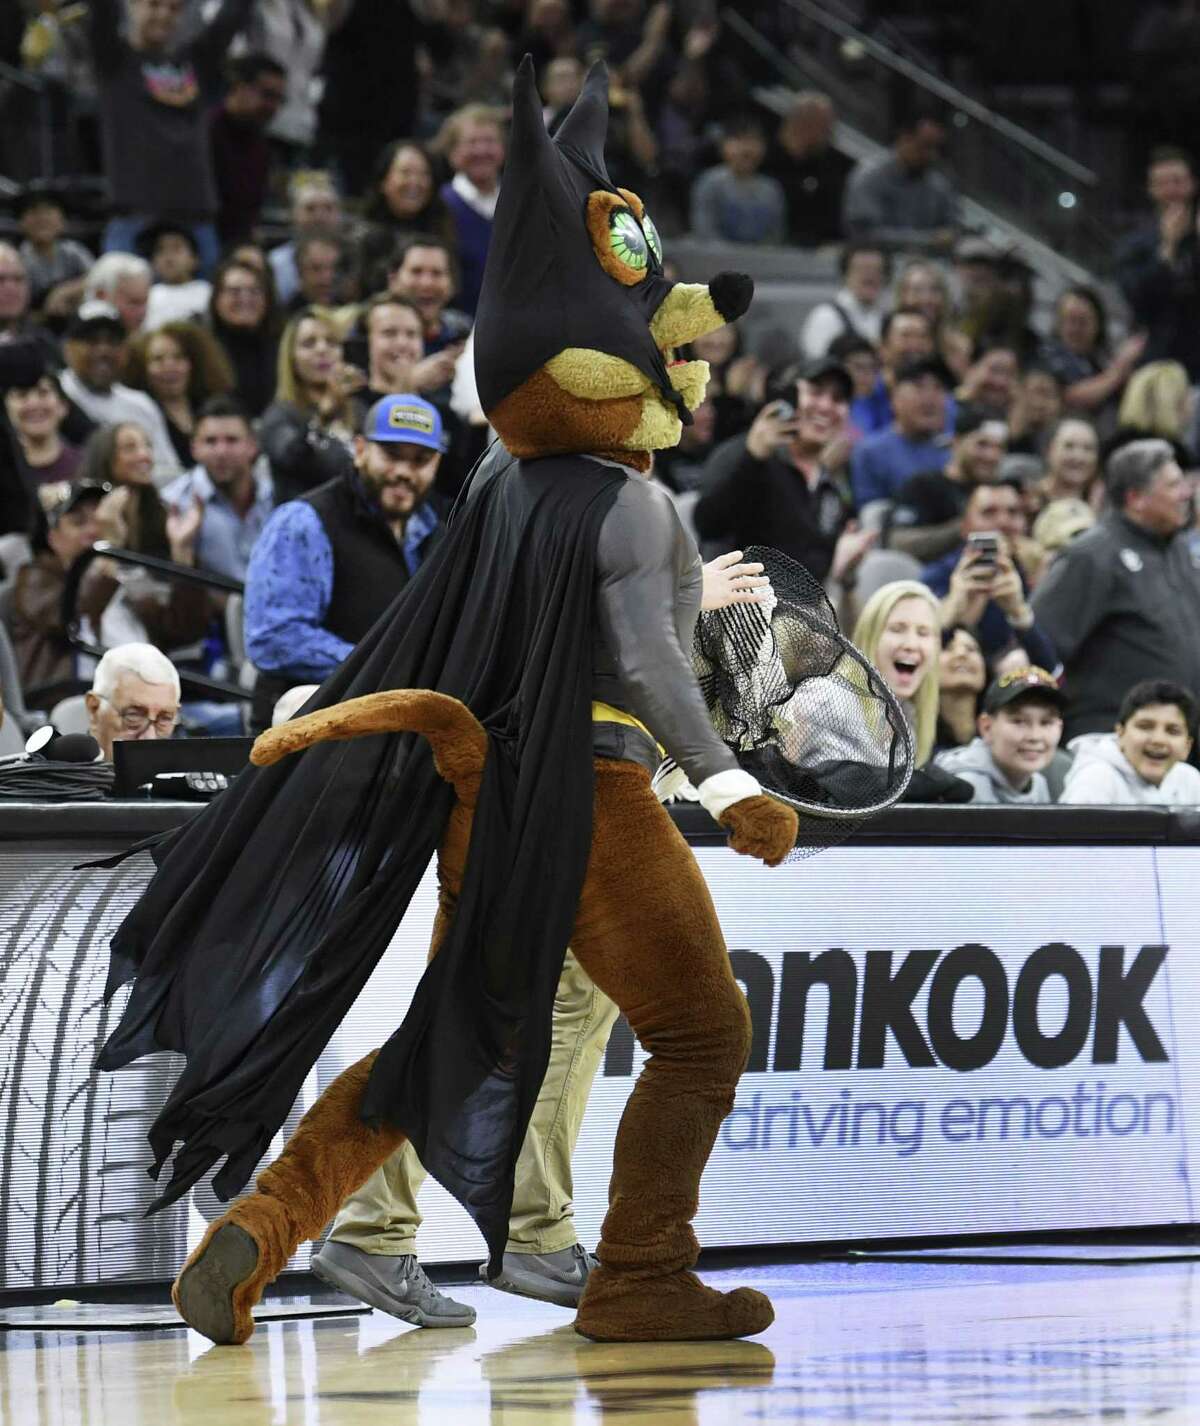 The Spurs Coyote and an assistant walk off the court with a bat that they caught during NBA action in the AT&T Center on Saturday, Feb. 2, 2019. The flying mammals have taken up residence in the arena.